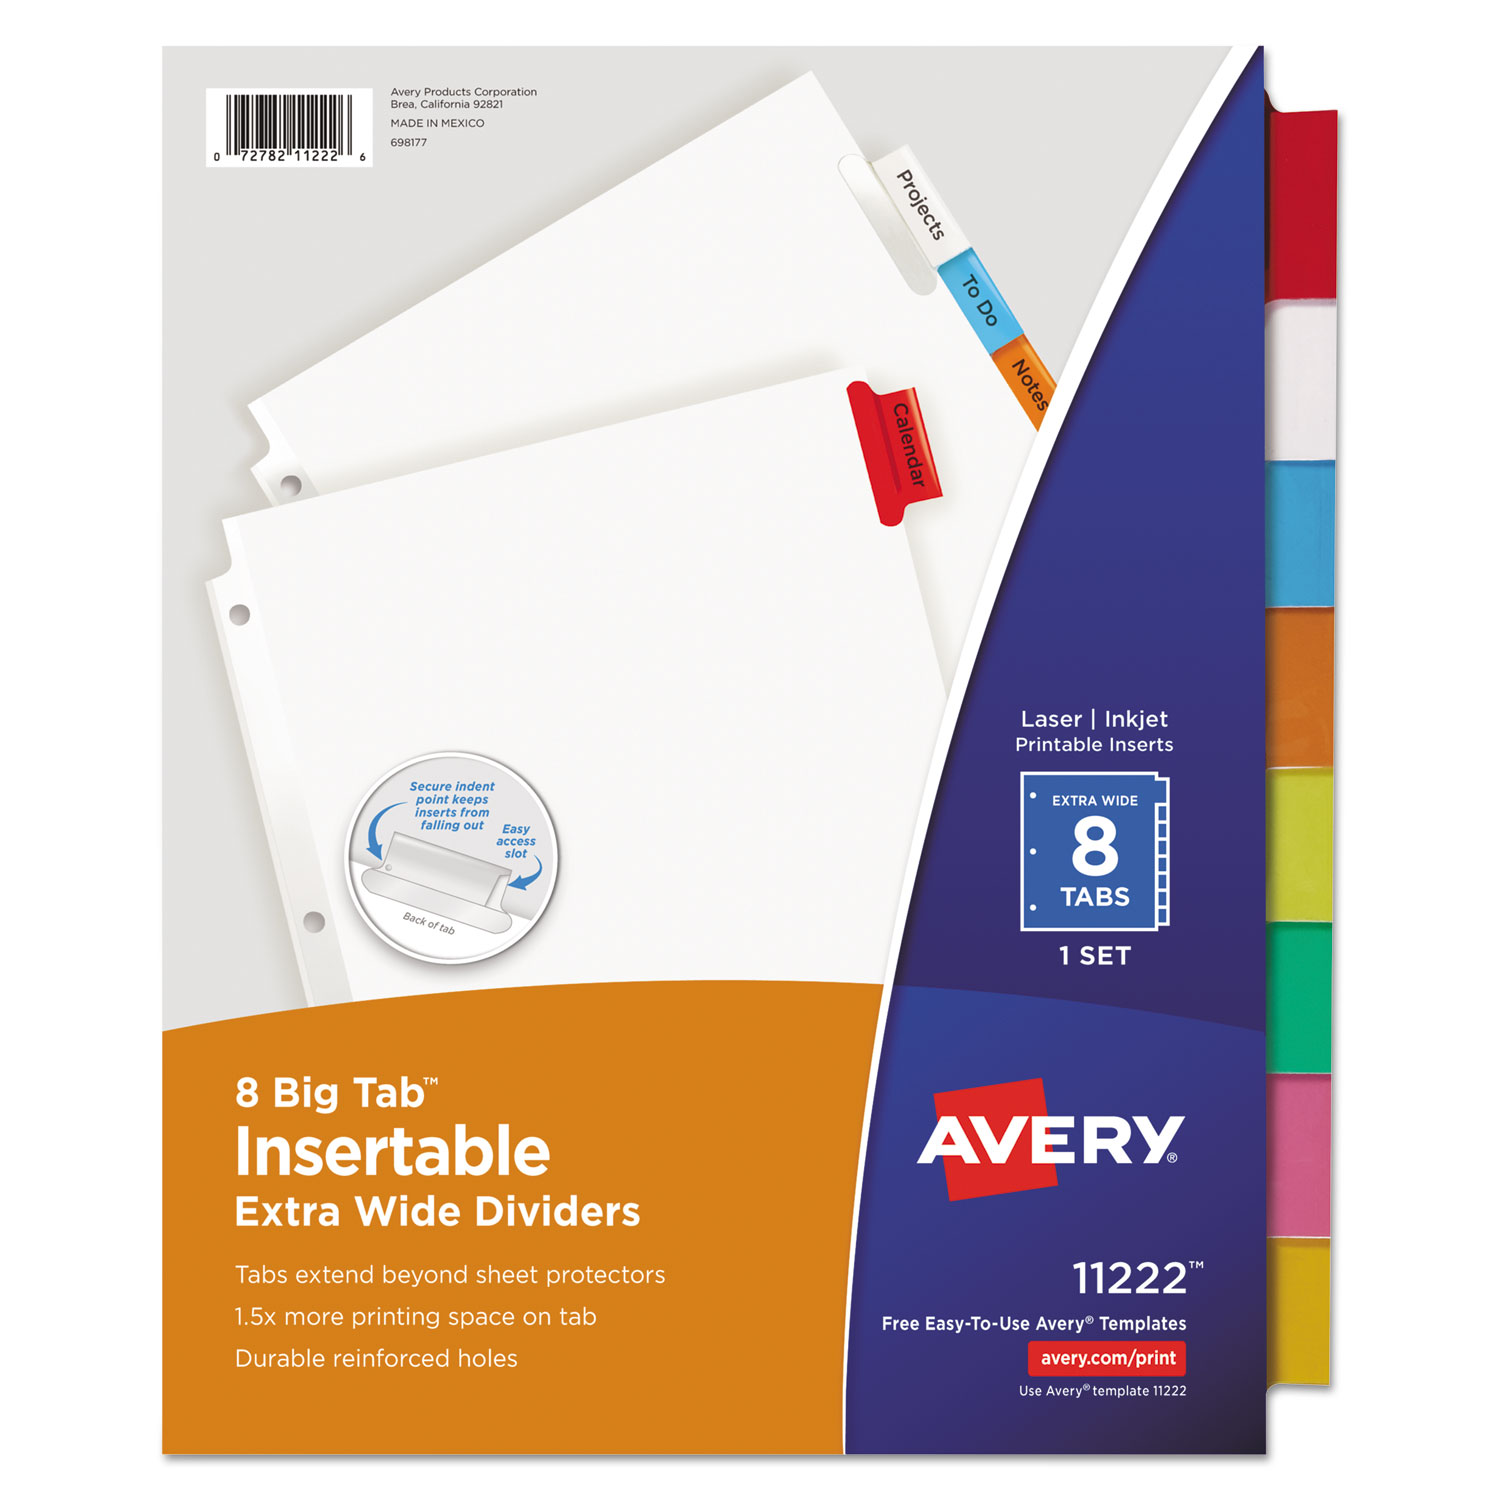  Avery 11222 Insertable Big Tab Dividers, 8-Tab, 11 1/8 x 9 1/4 (AVE11222) 